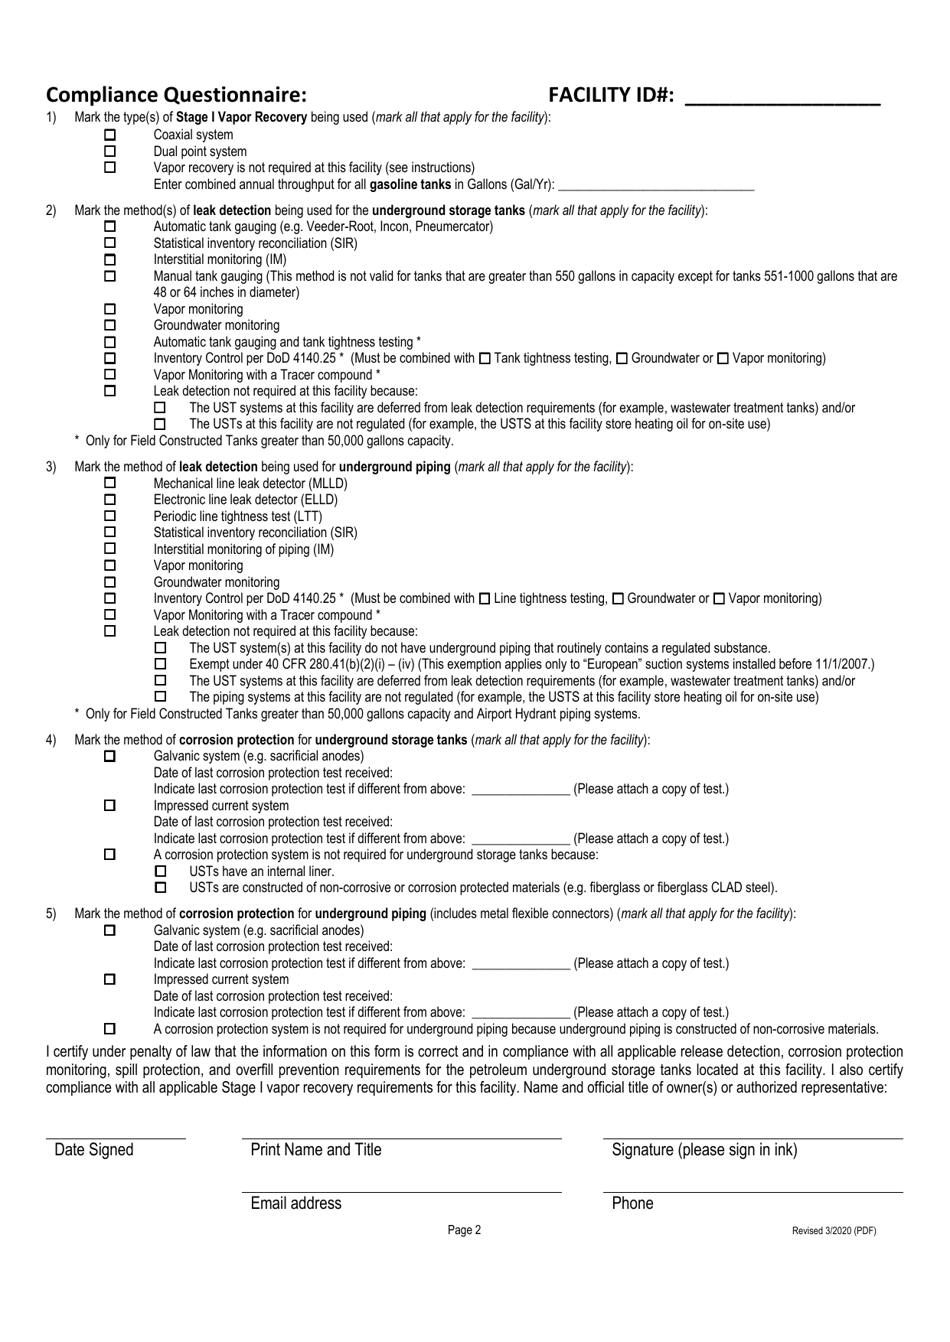 Compliance Questionnaire - North Carolina, Page 1